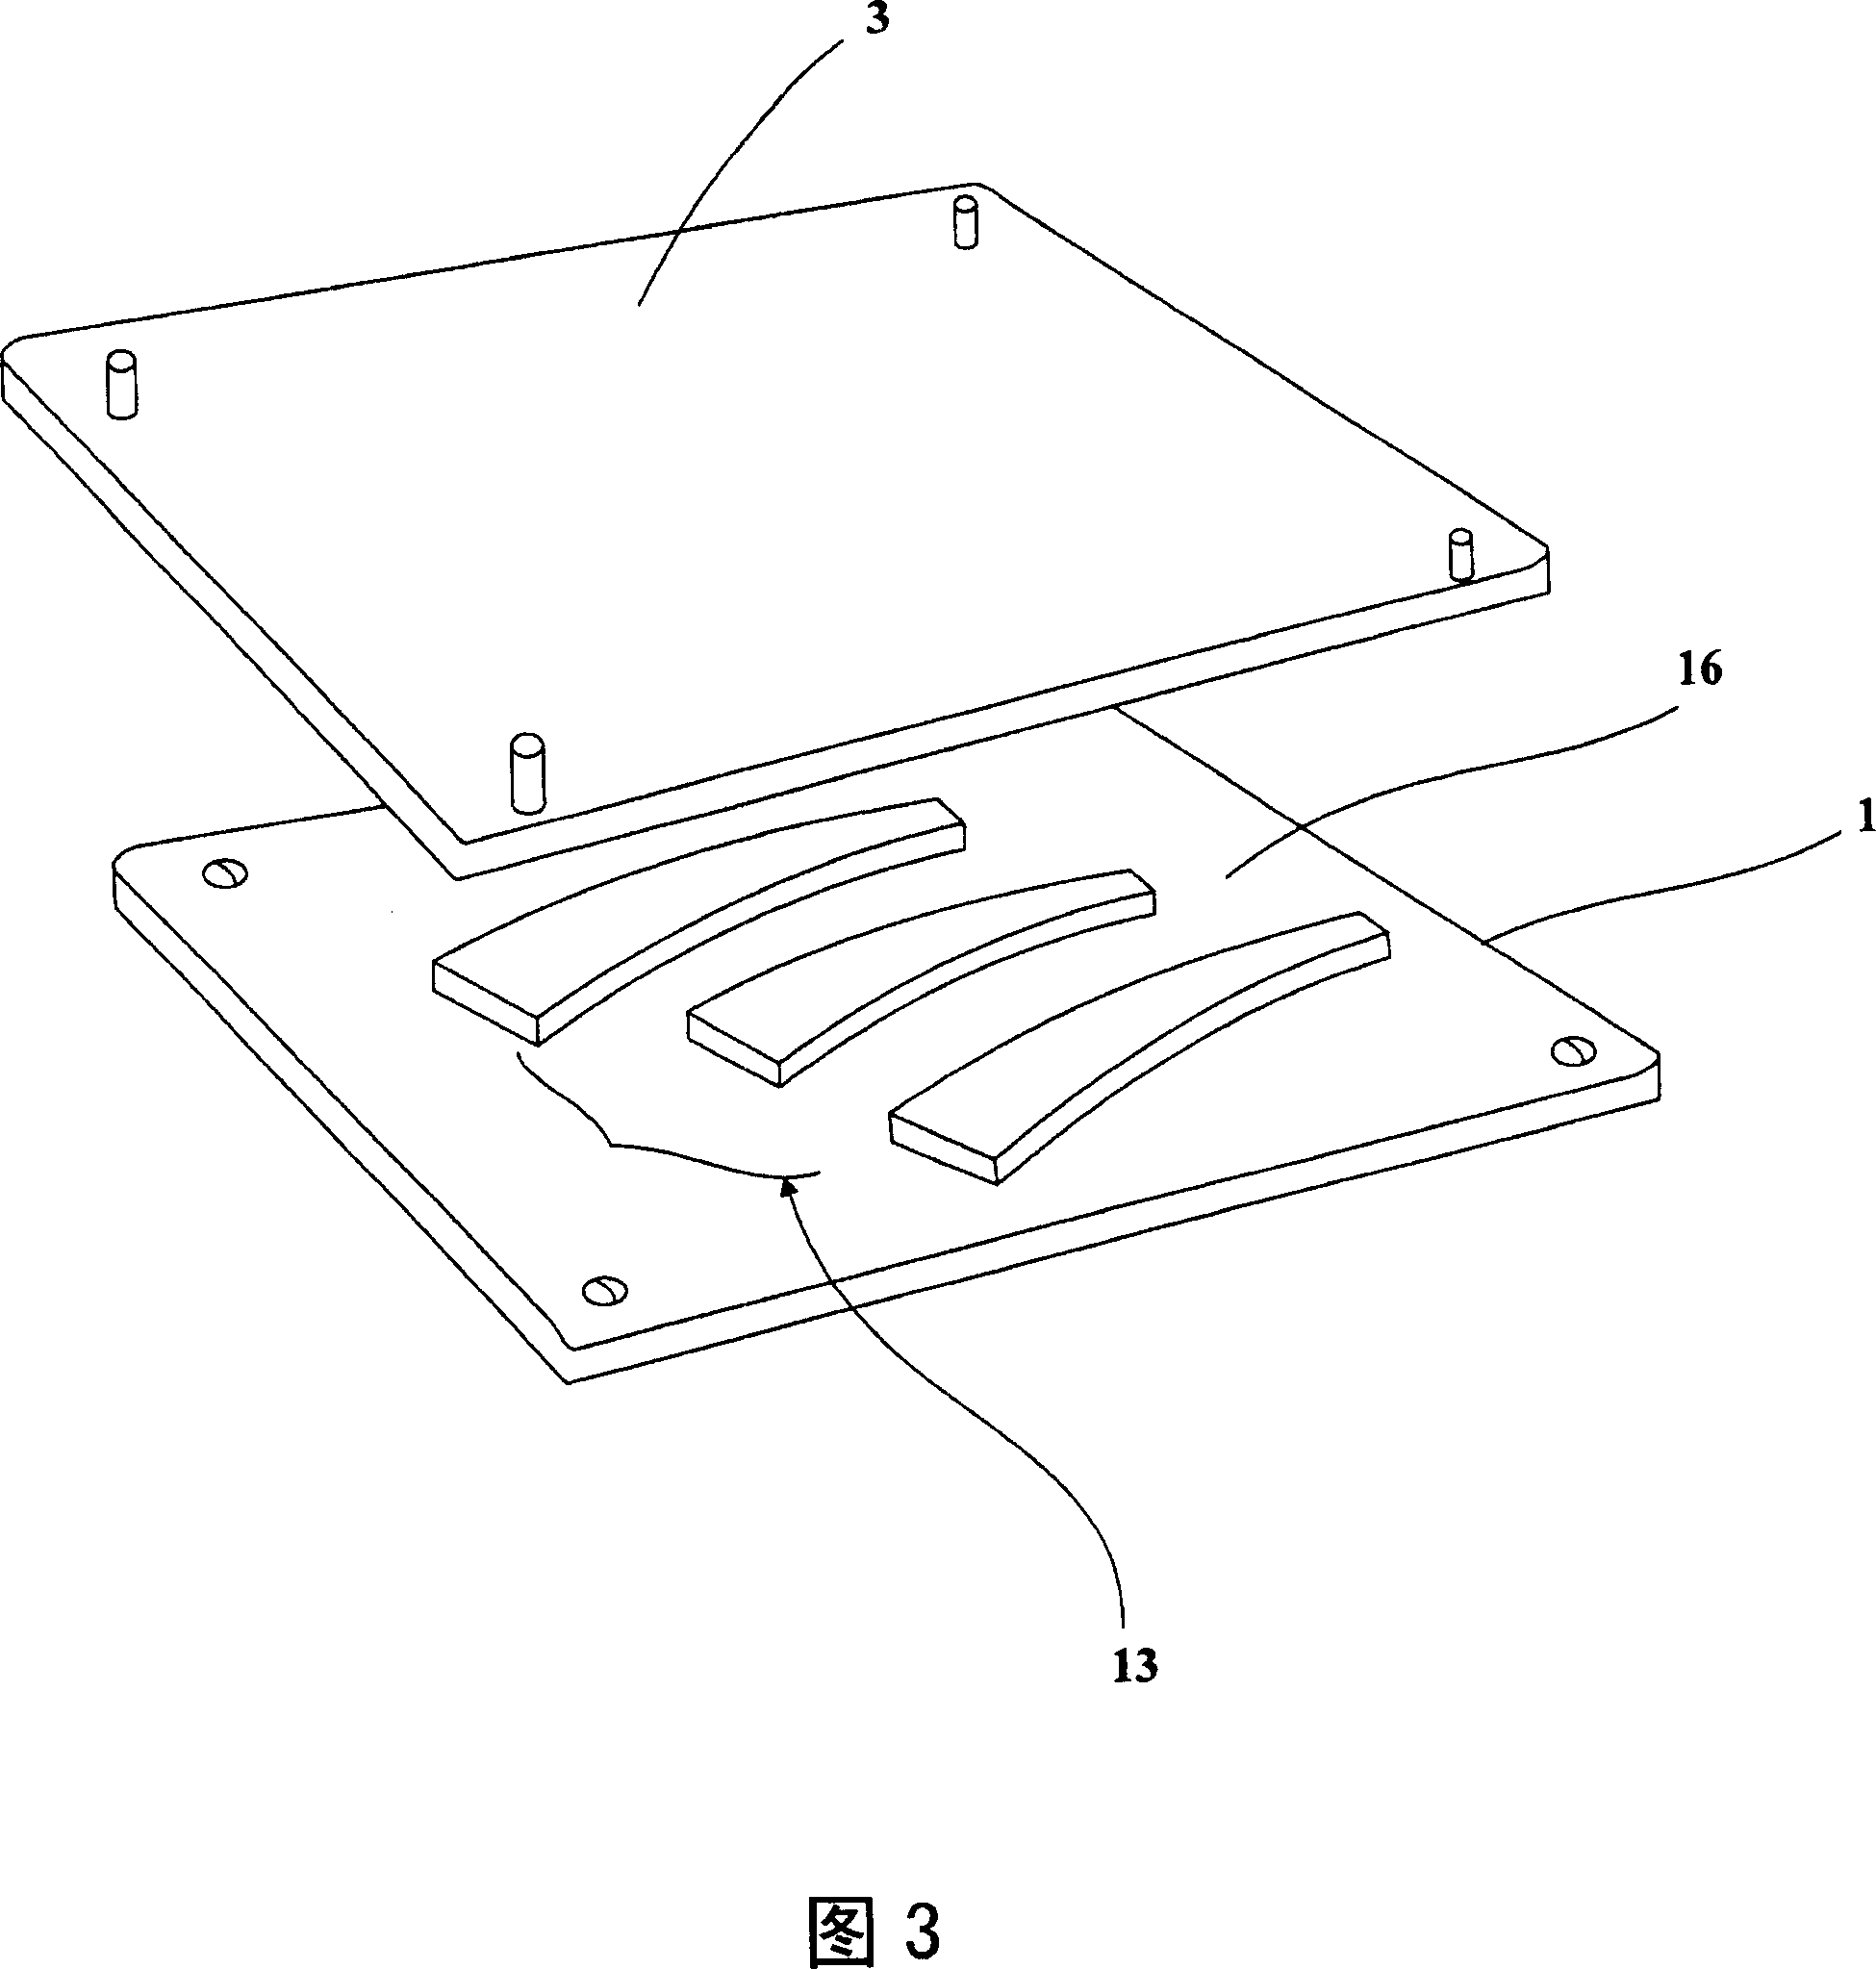 Method for preparing textured pattern presenting 3D visual effect through spray painting